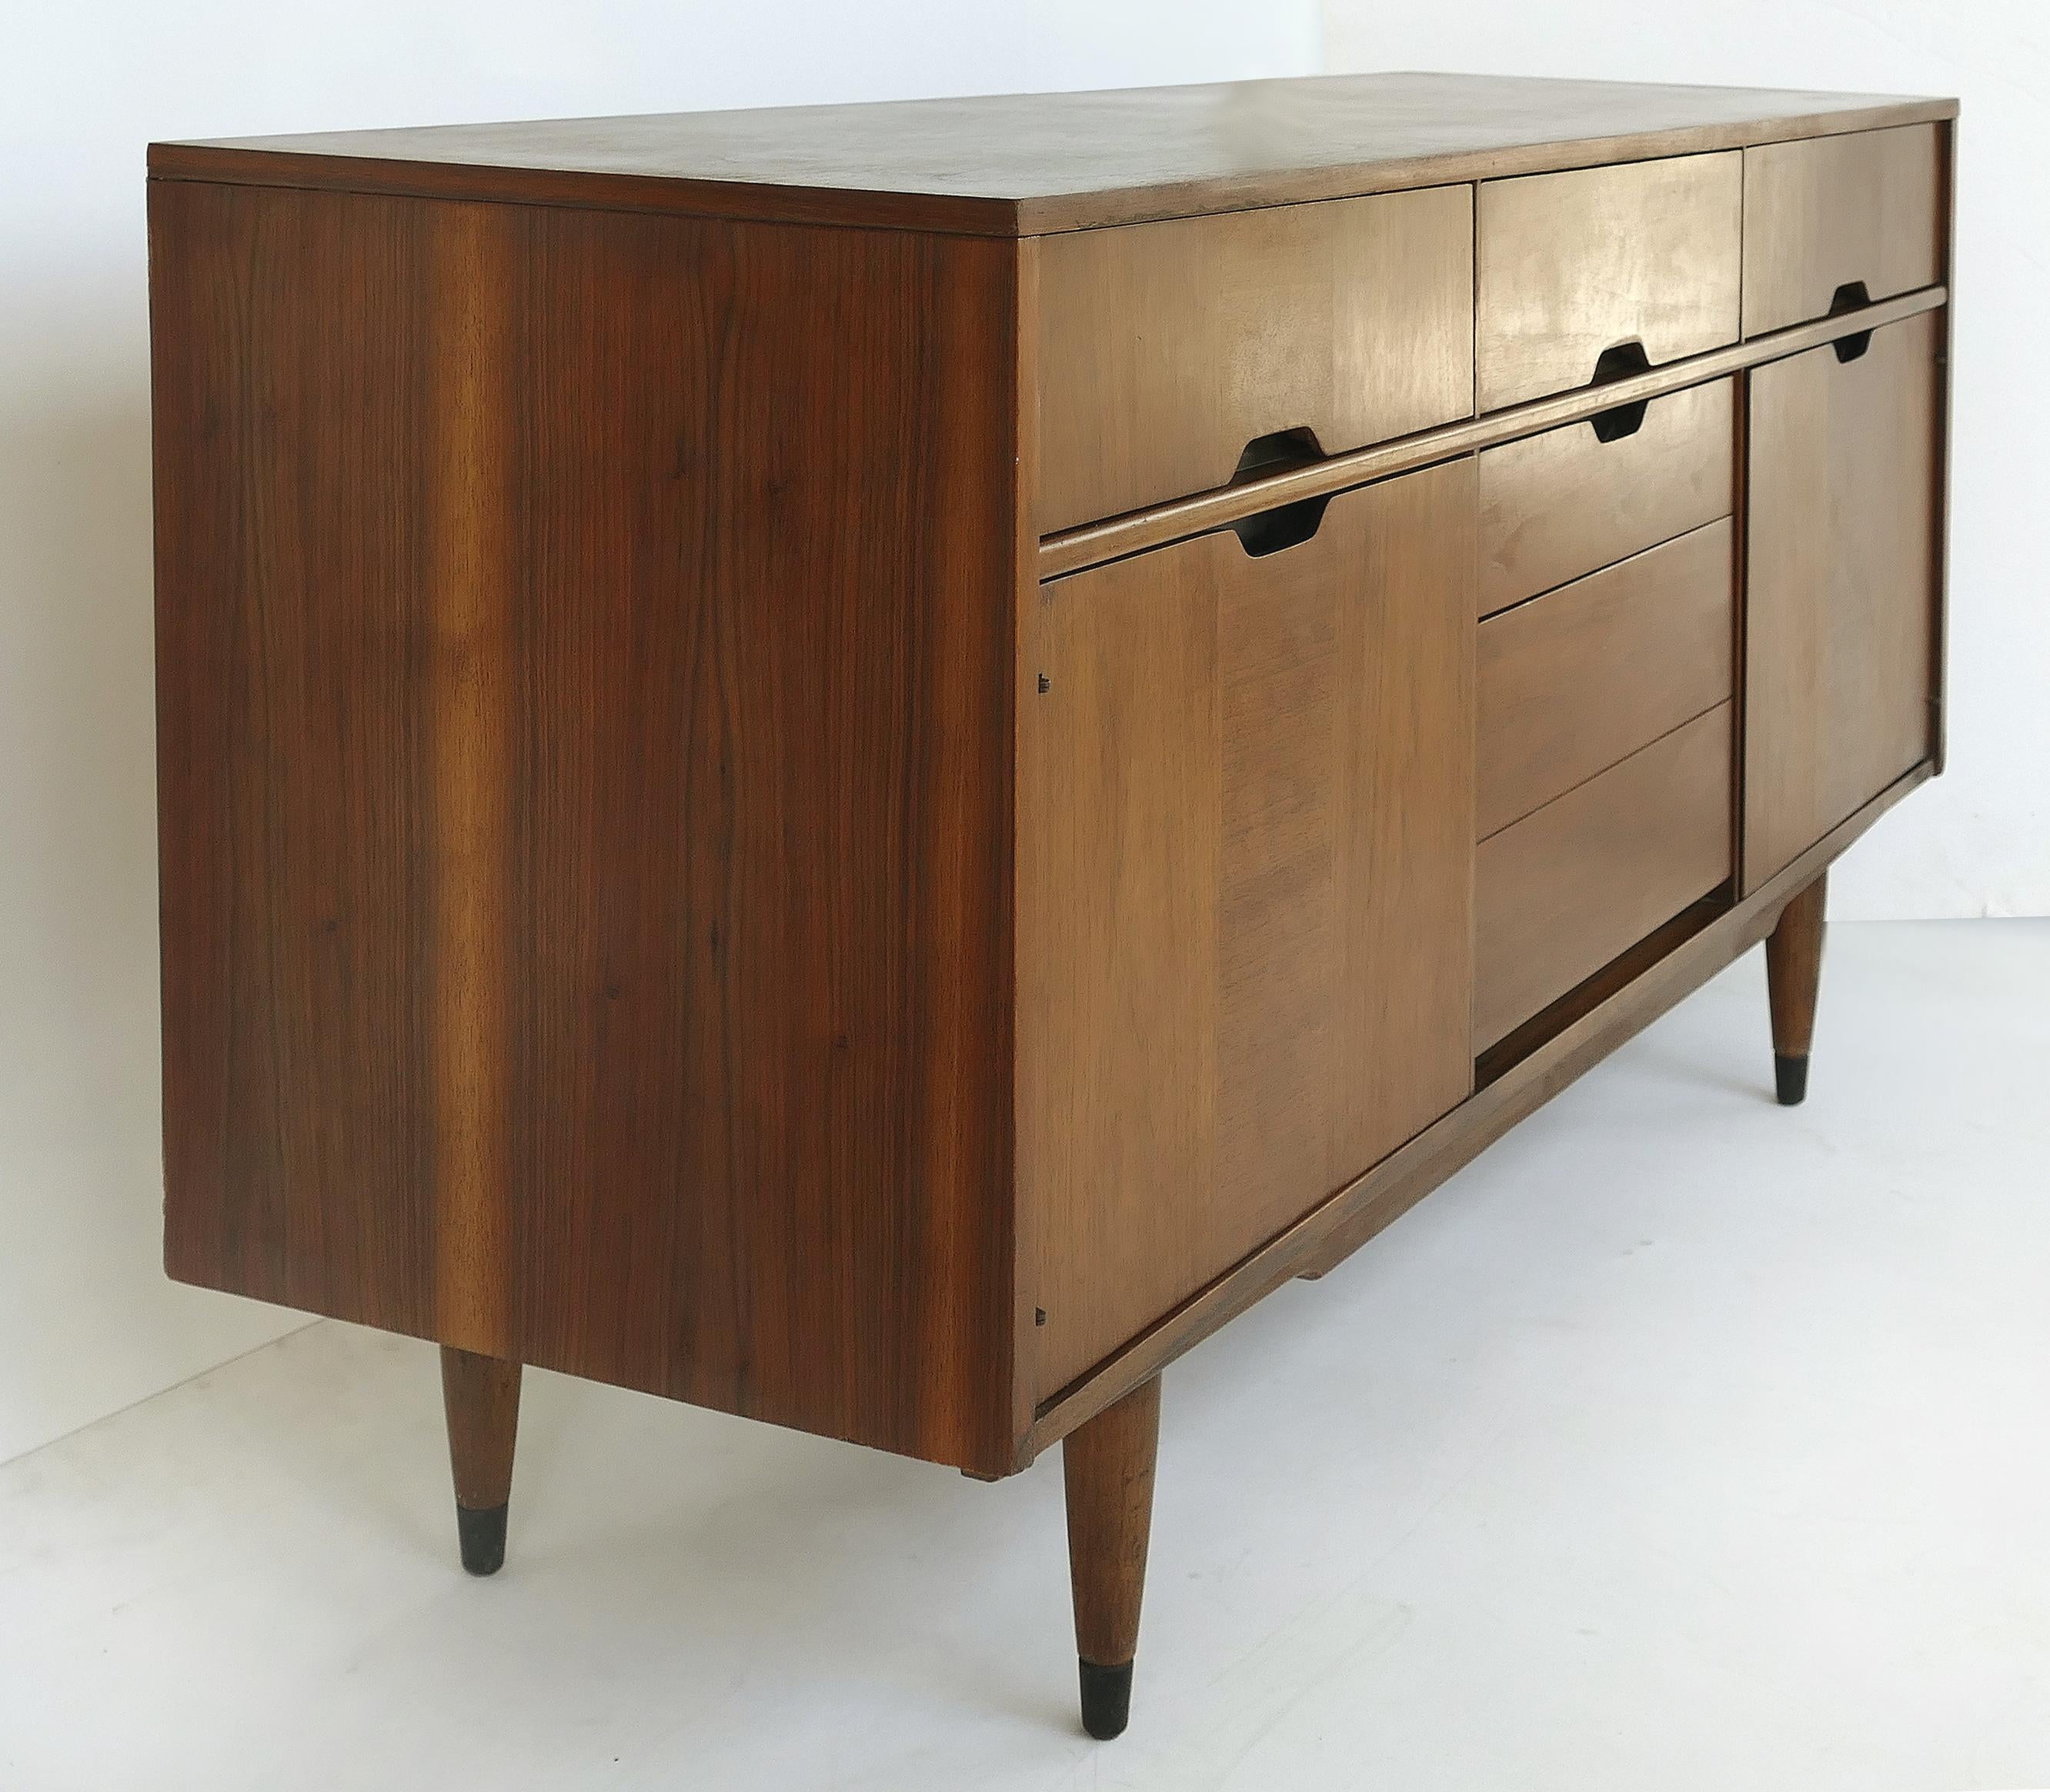 Offered for sale is a Kroehler custom crafted Mid-Century Modern credenza. The cabinet is supported by tapered legs with brass capped feet. The center portion has three drawers with the bottom drawer being doubled in depth. The credenza has drawers